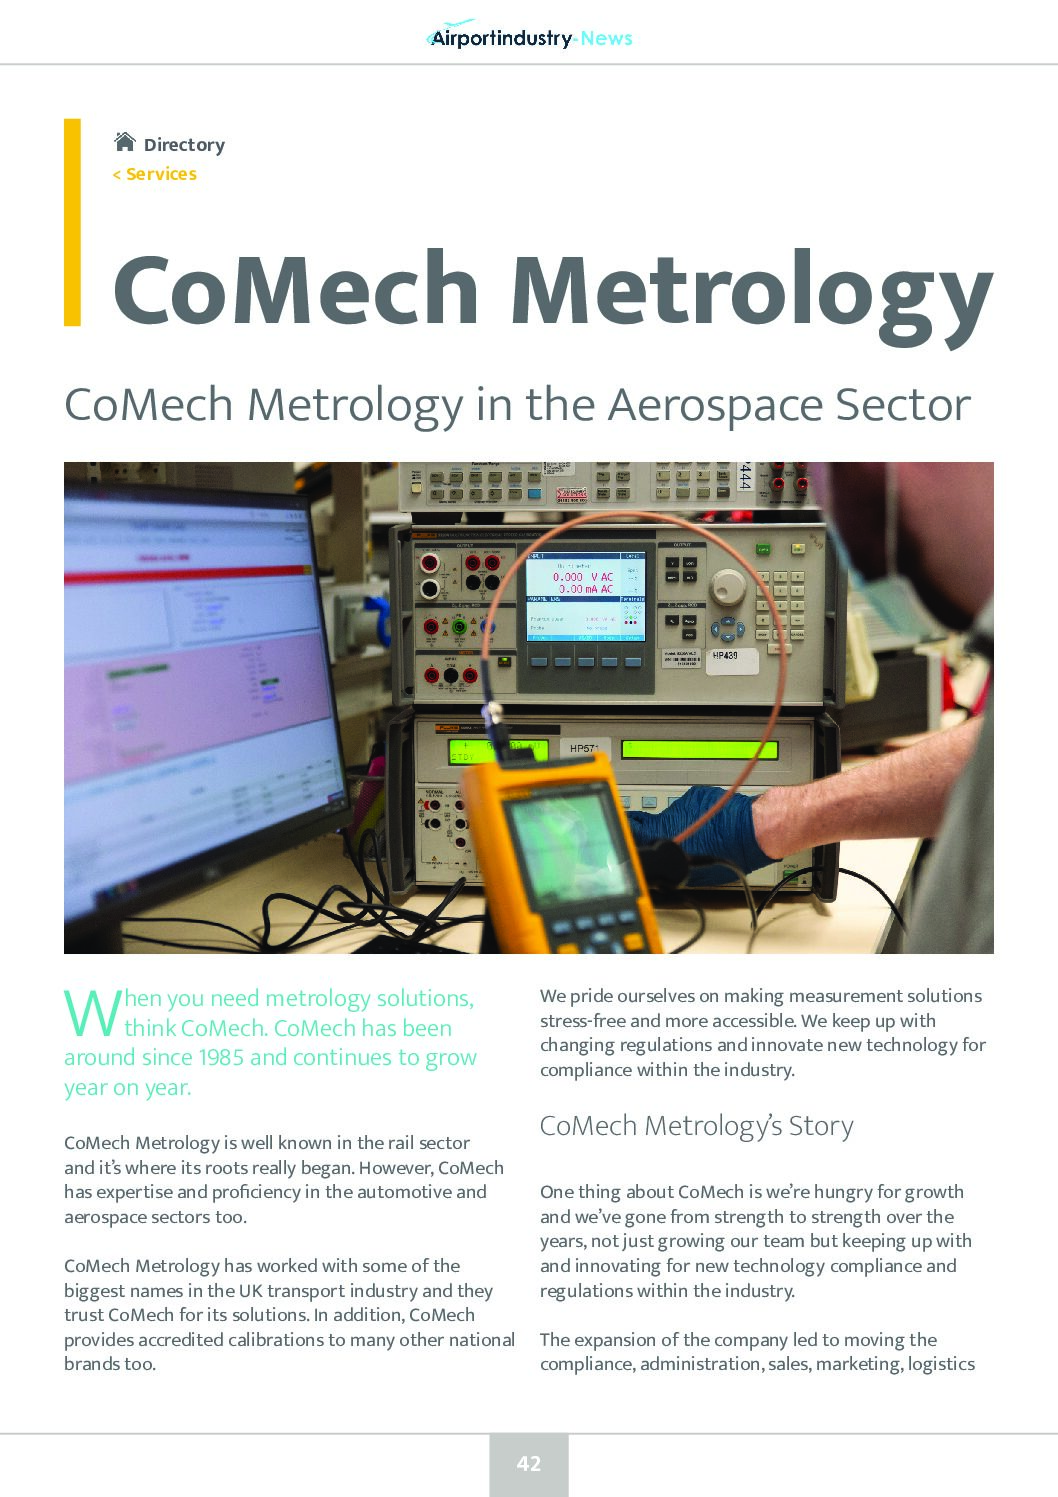 CoMech Metrology in the Aerospace Sector